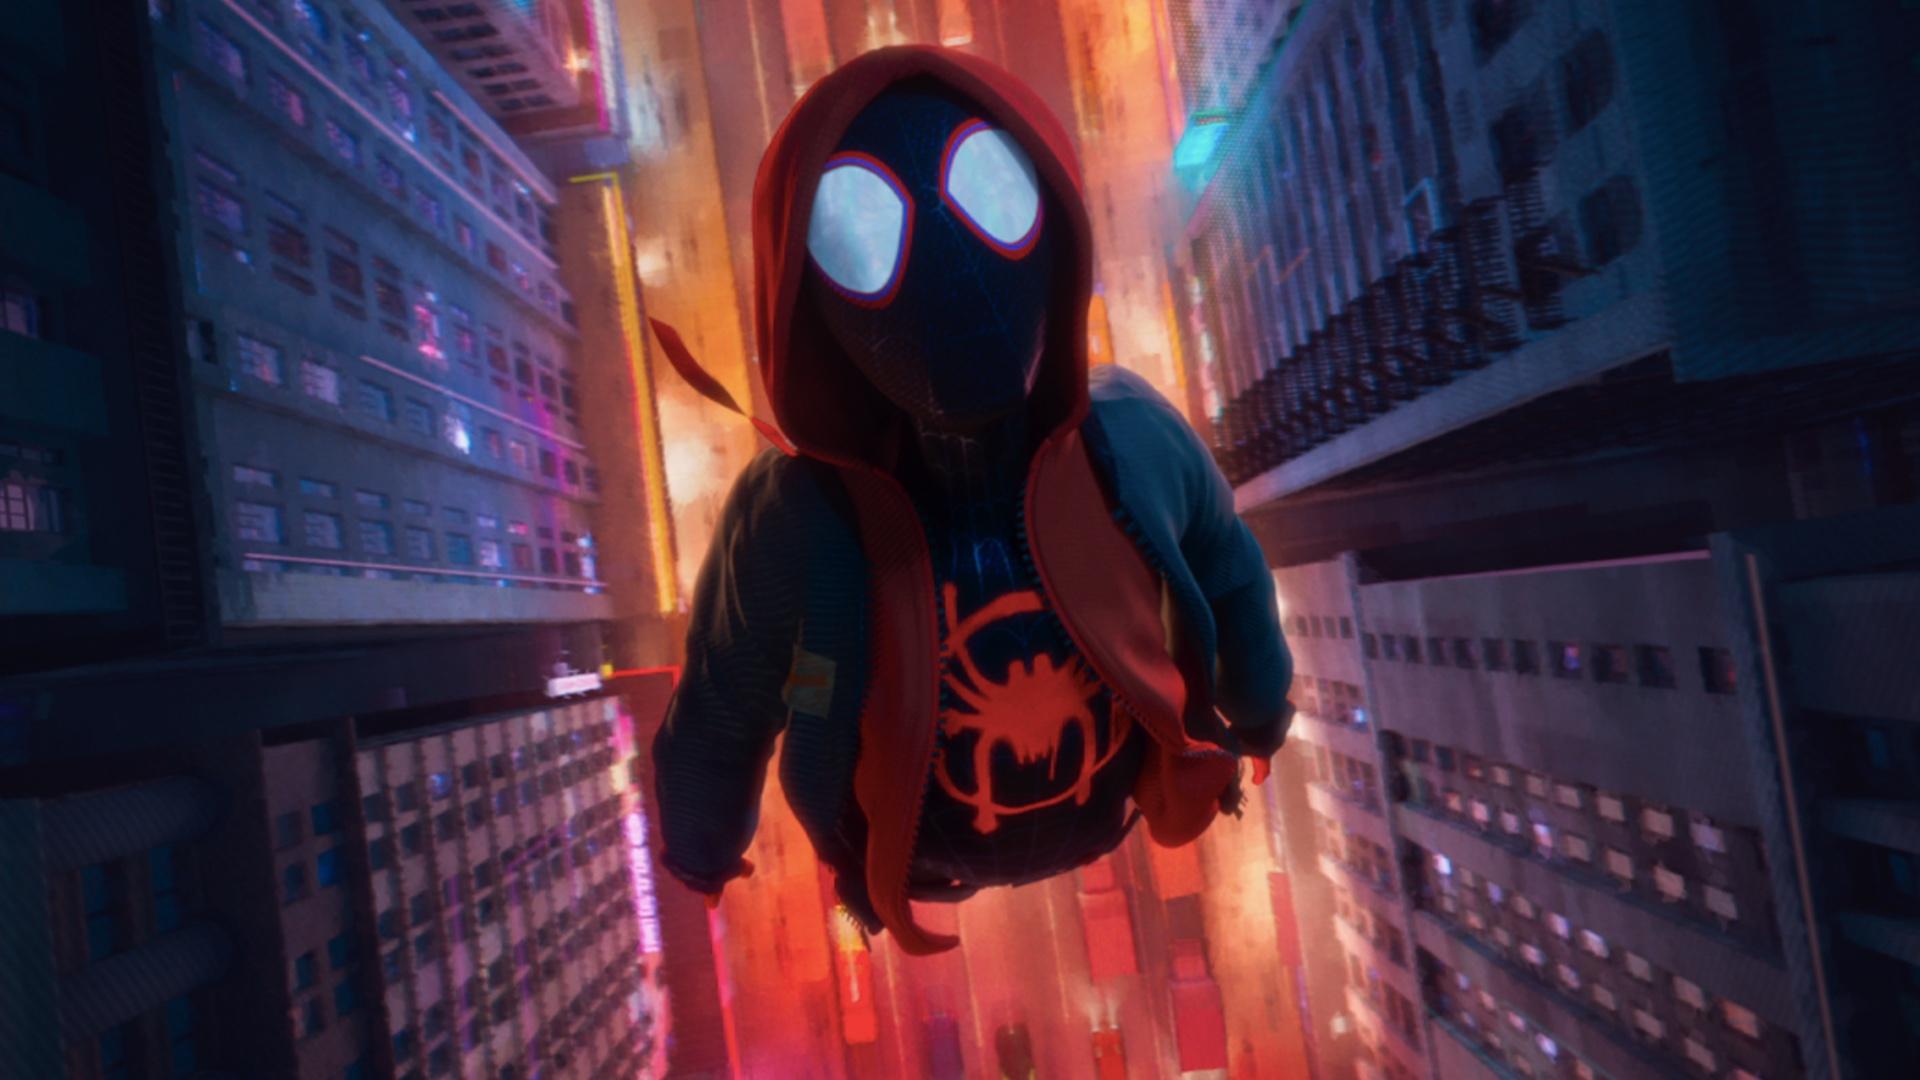 The SPIDER MAN: INTO THE SPIDER VERSE Team Are Hard At Work